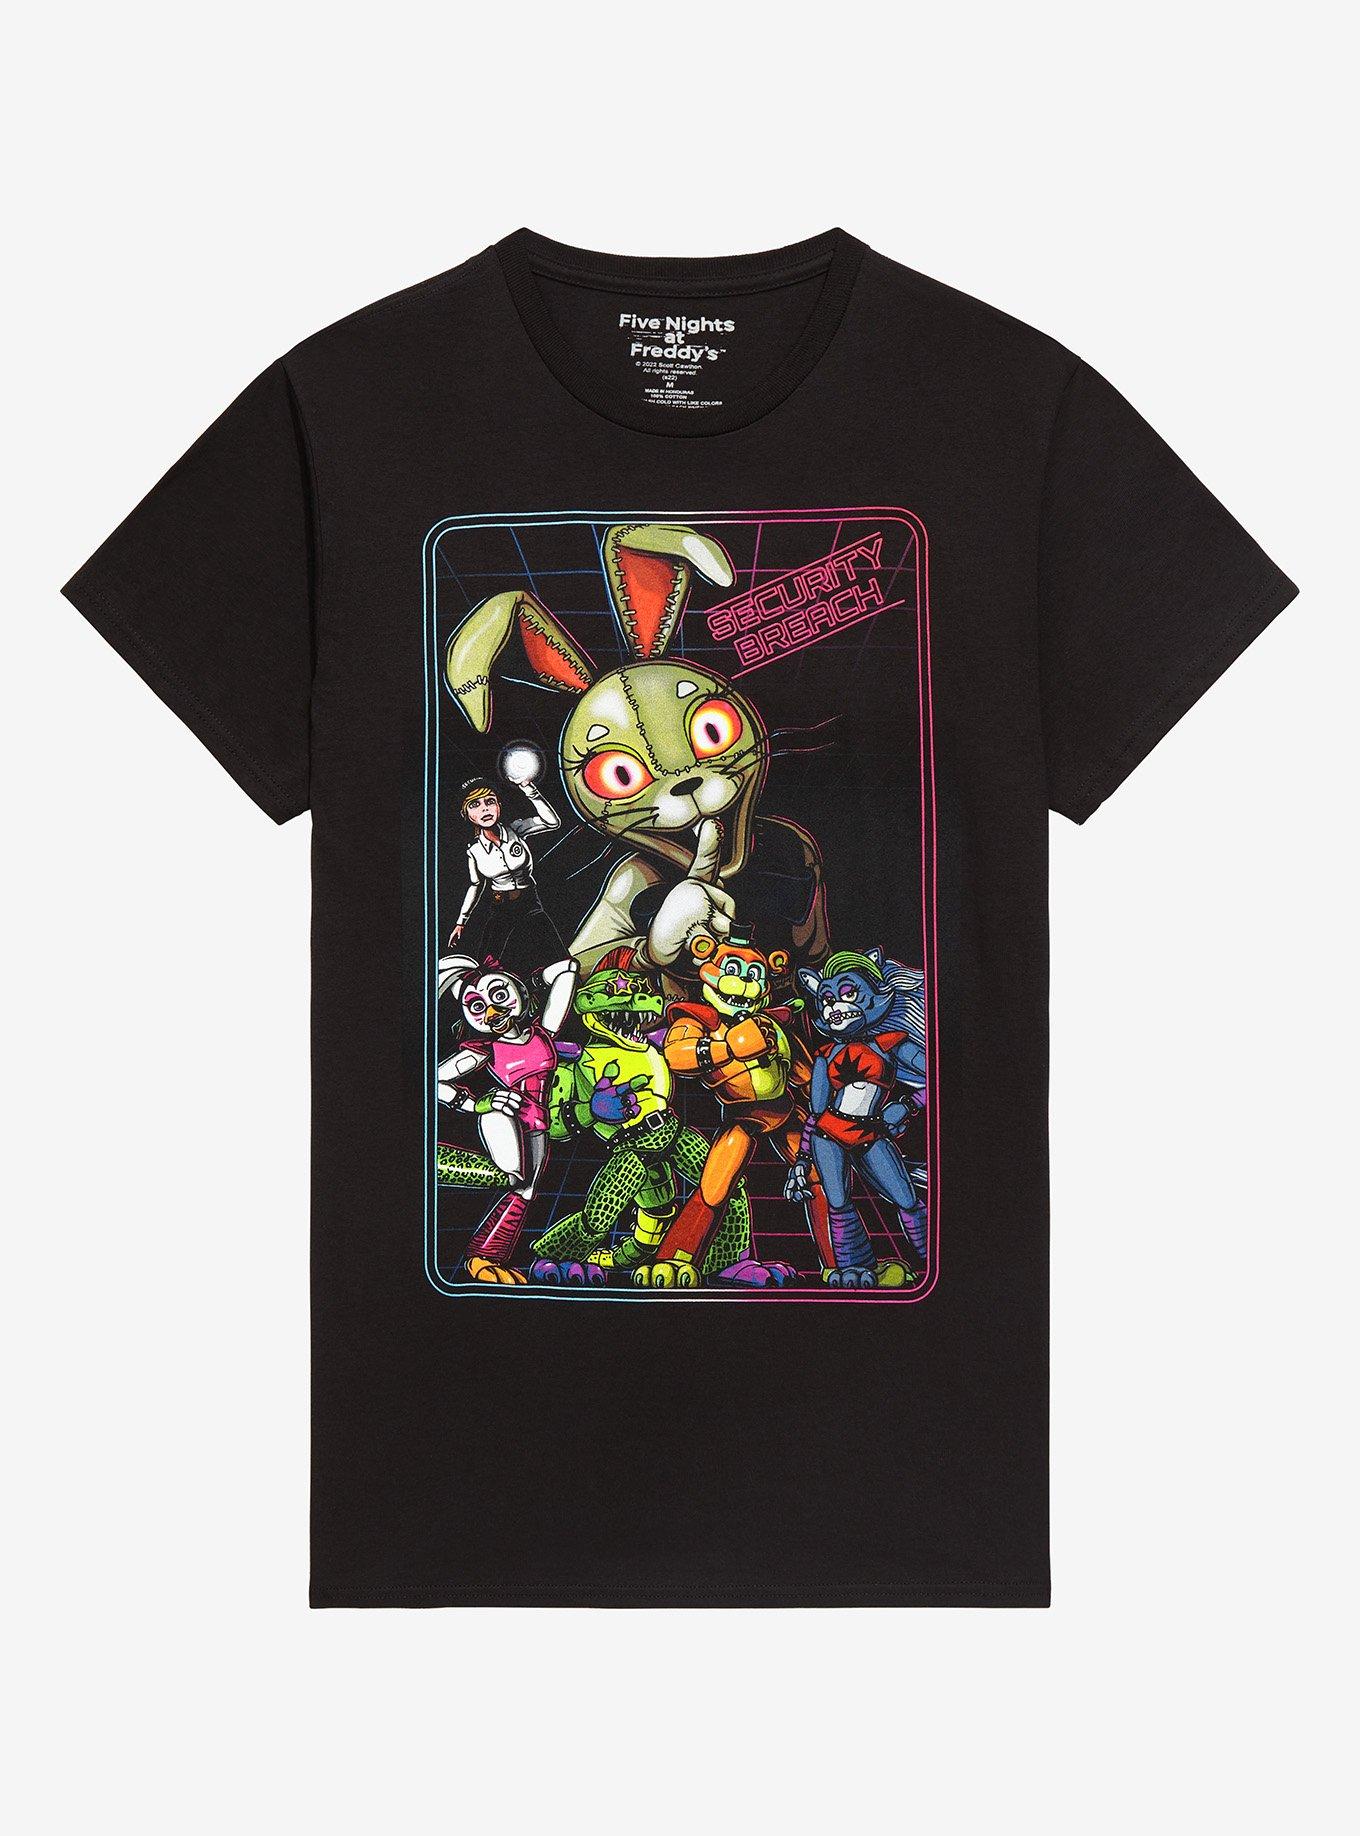 Five Nights At Freddy's: Security Breach Poster T-Shirt, BLACK, hi-res